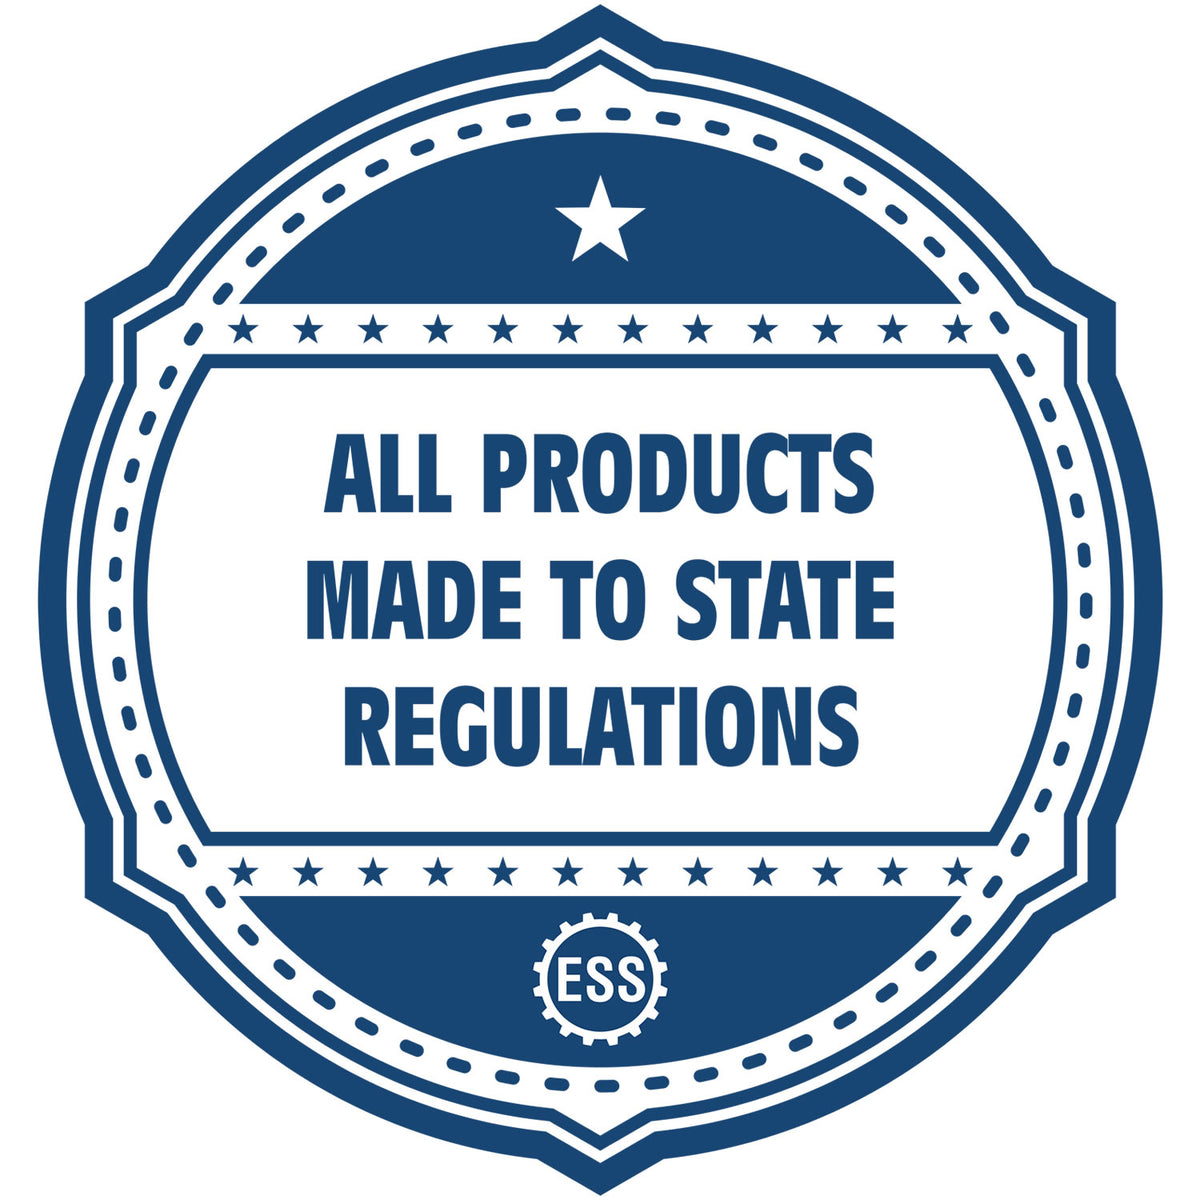 An icon or badge element for the PSI Texas Notary Stamp showing that this product is made in compliance with state regulations.